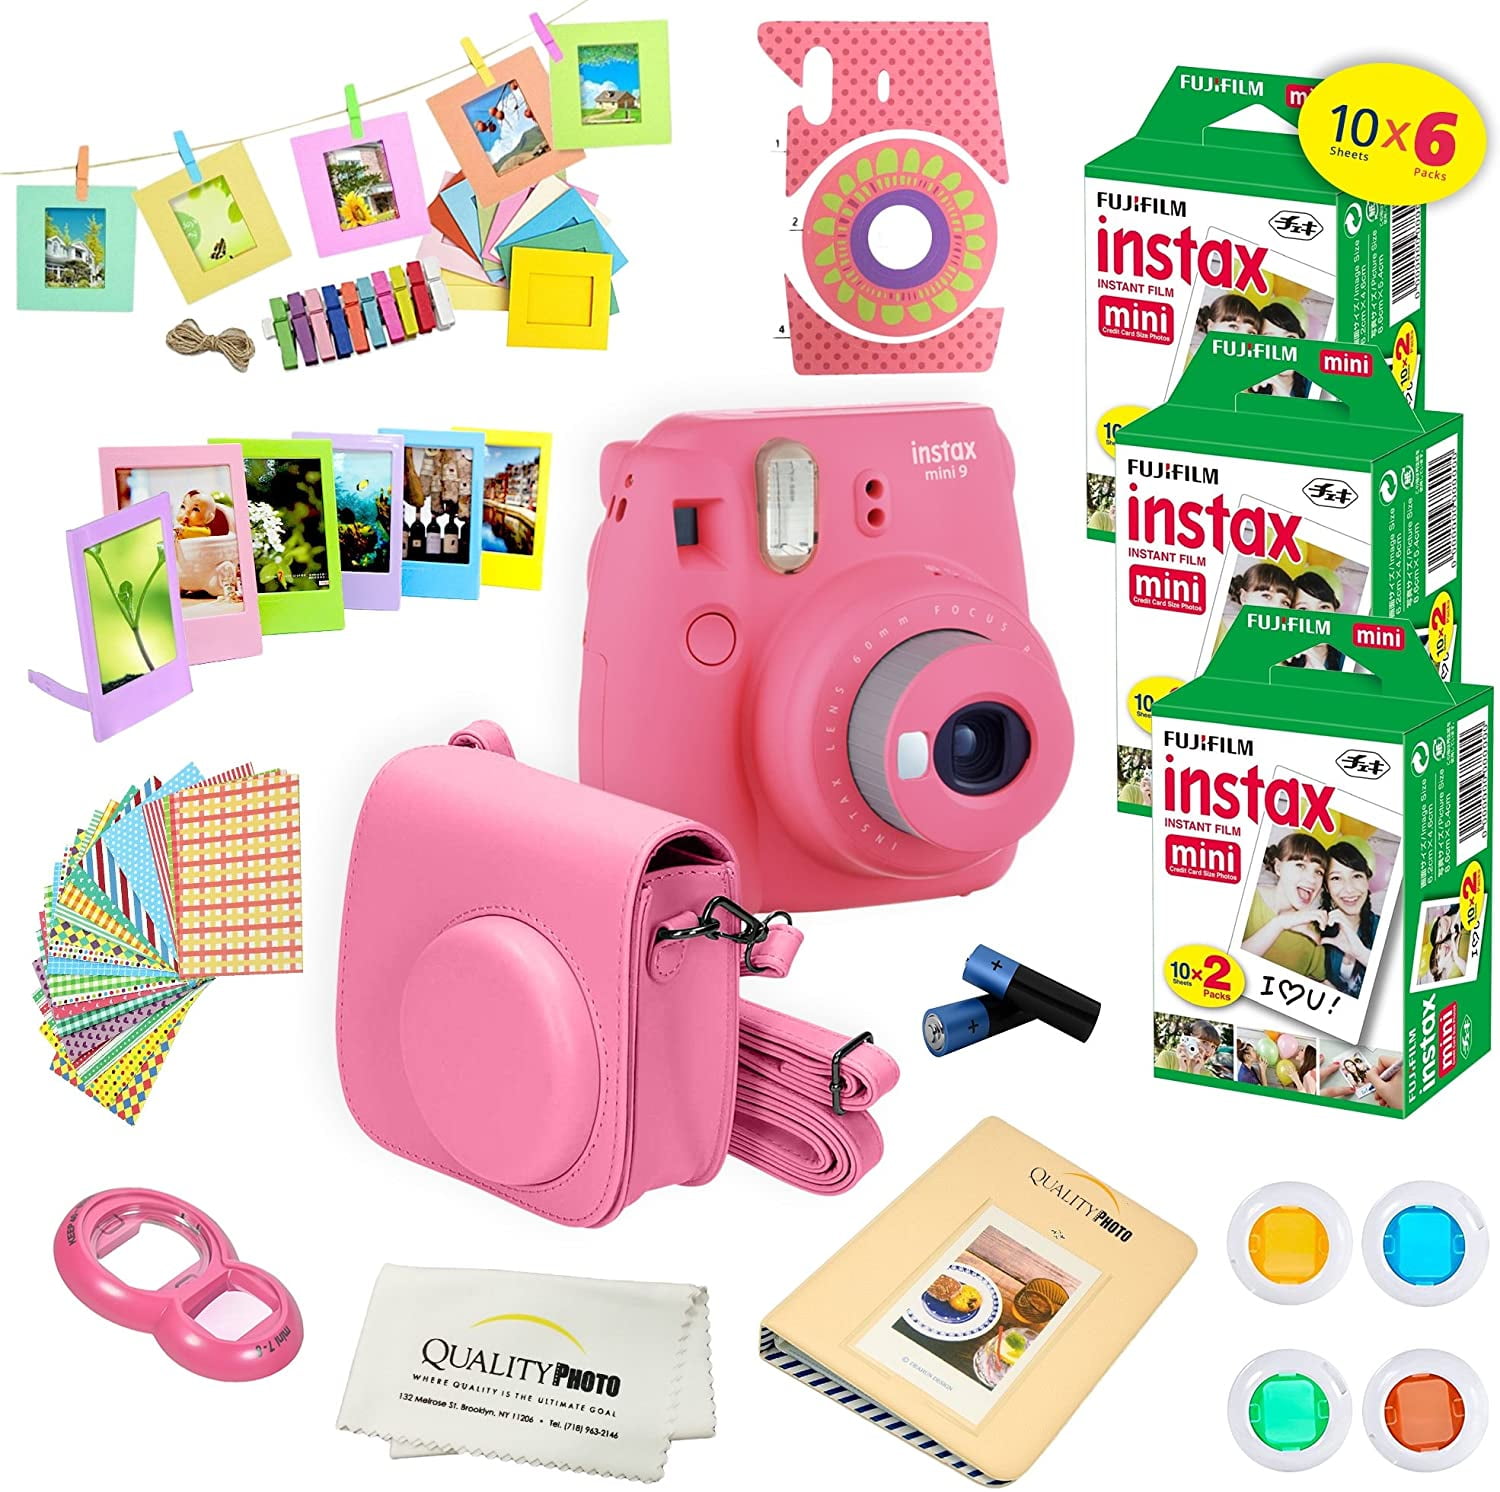 Fujifilm Instax 9 Camera Pink + 15 PC Accessory Kit for Fujifilm instax mini 9 Instant Camera Includes: 40 Fuji Instax Films + Case + + Colored lenses + Assorted color/Style frames + MORE - Walmart.com